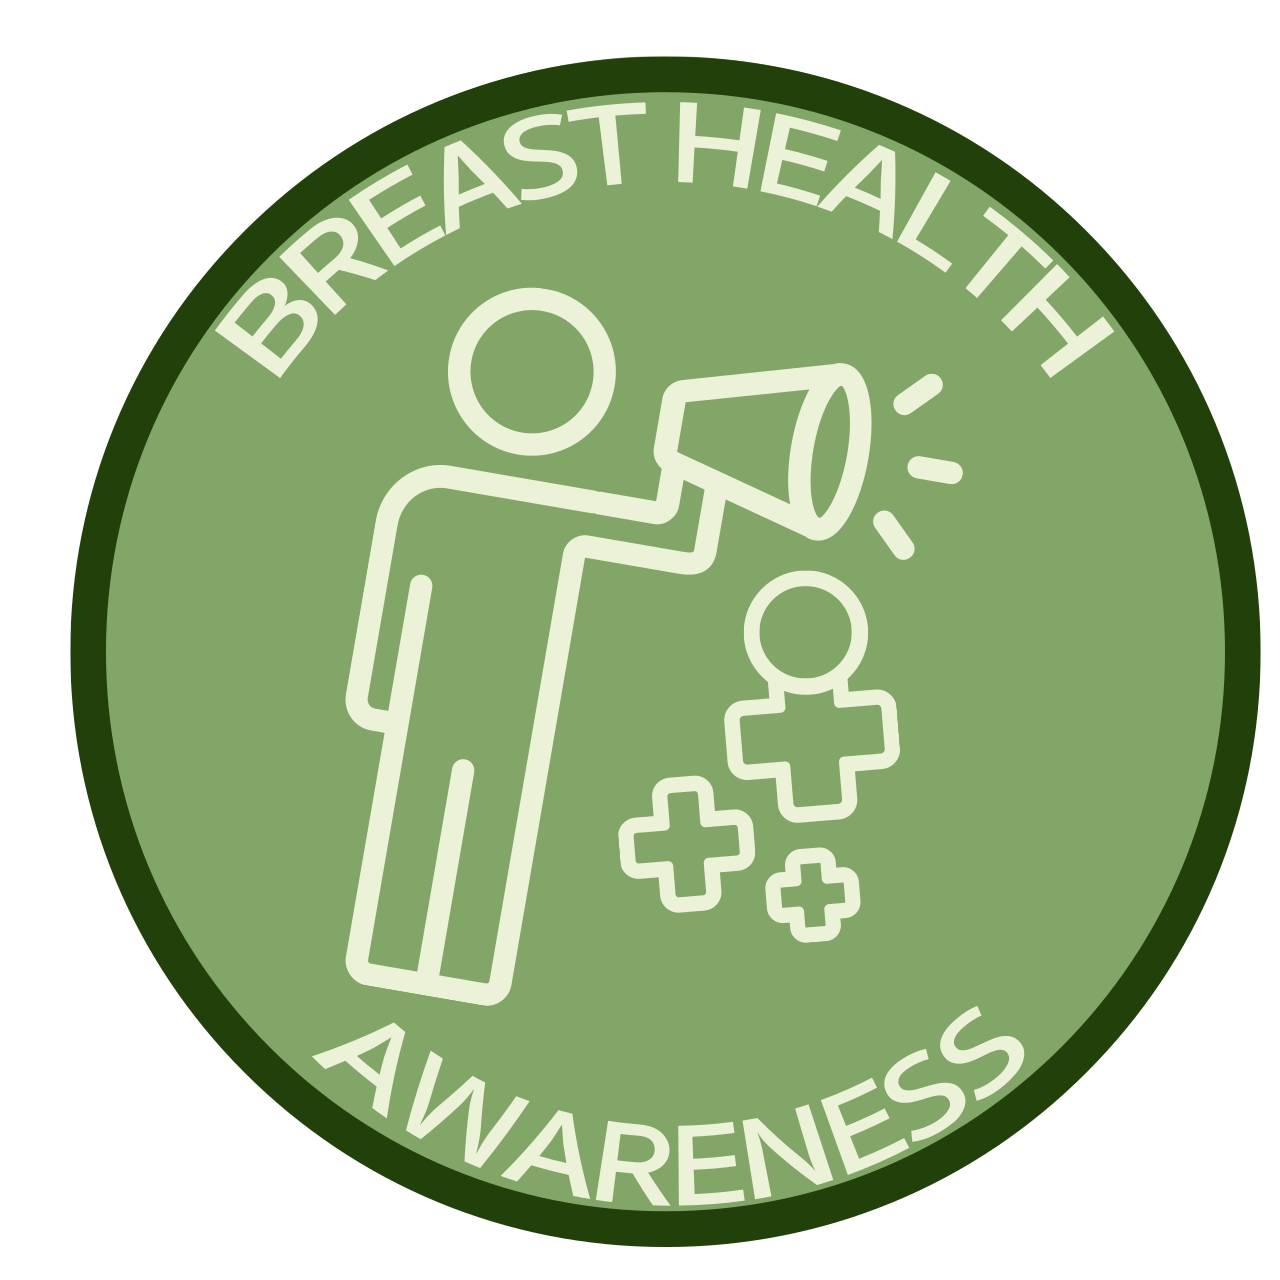 The badge created by Keely Roe, which teaches Girl Scouts about breast health.